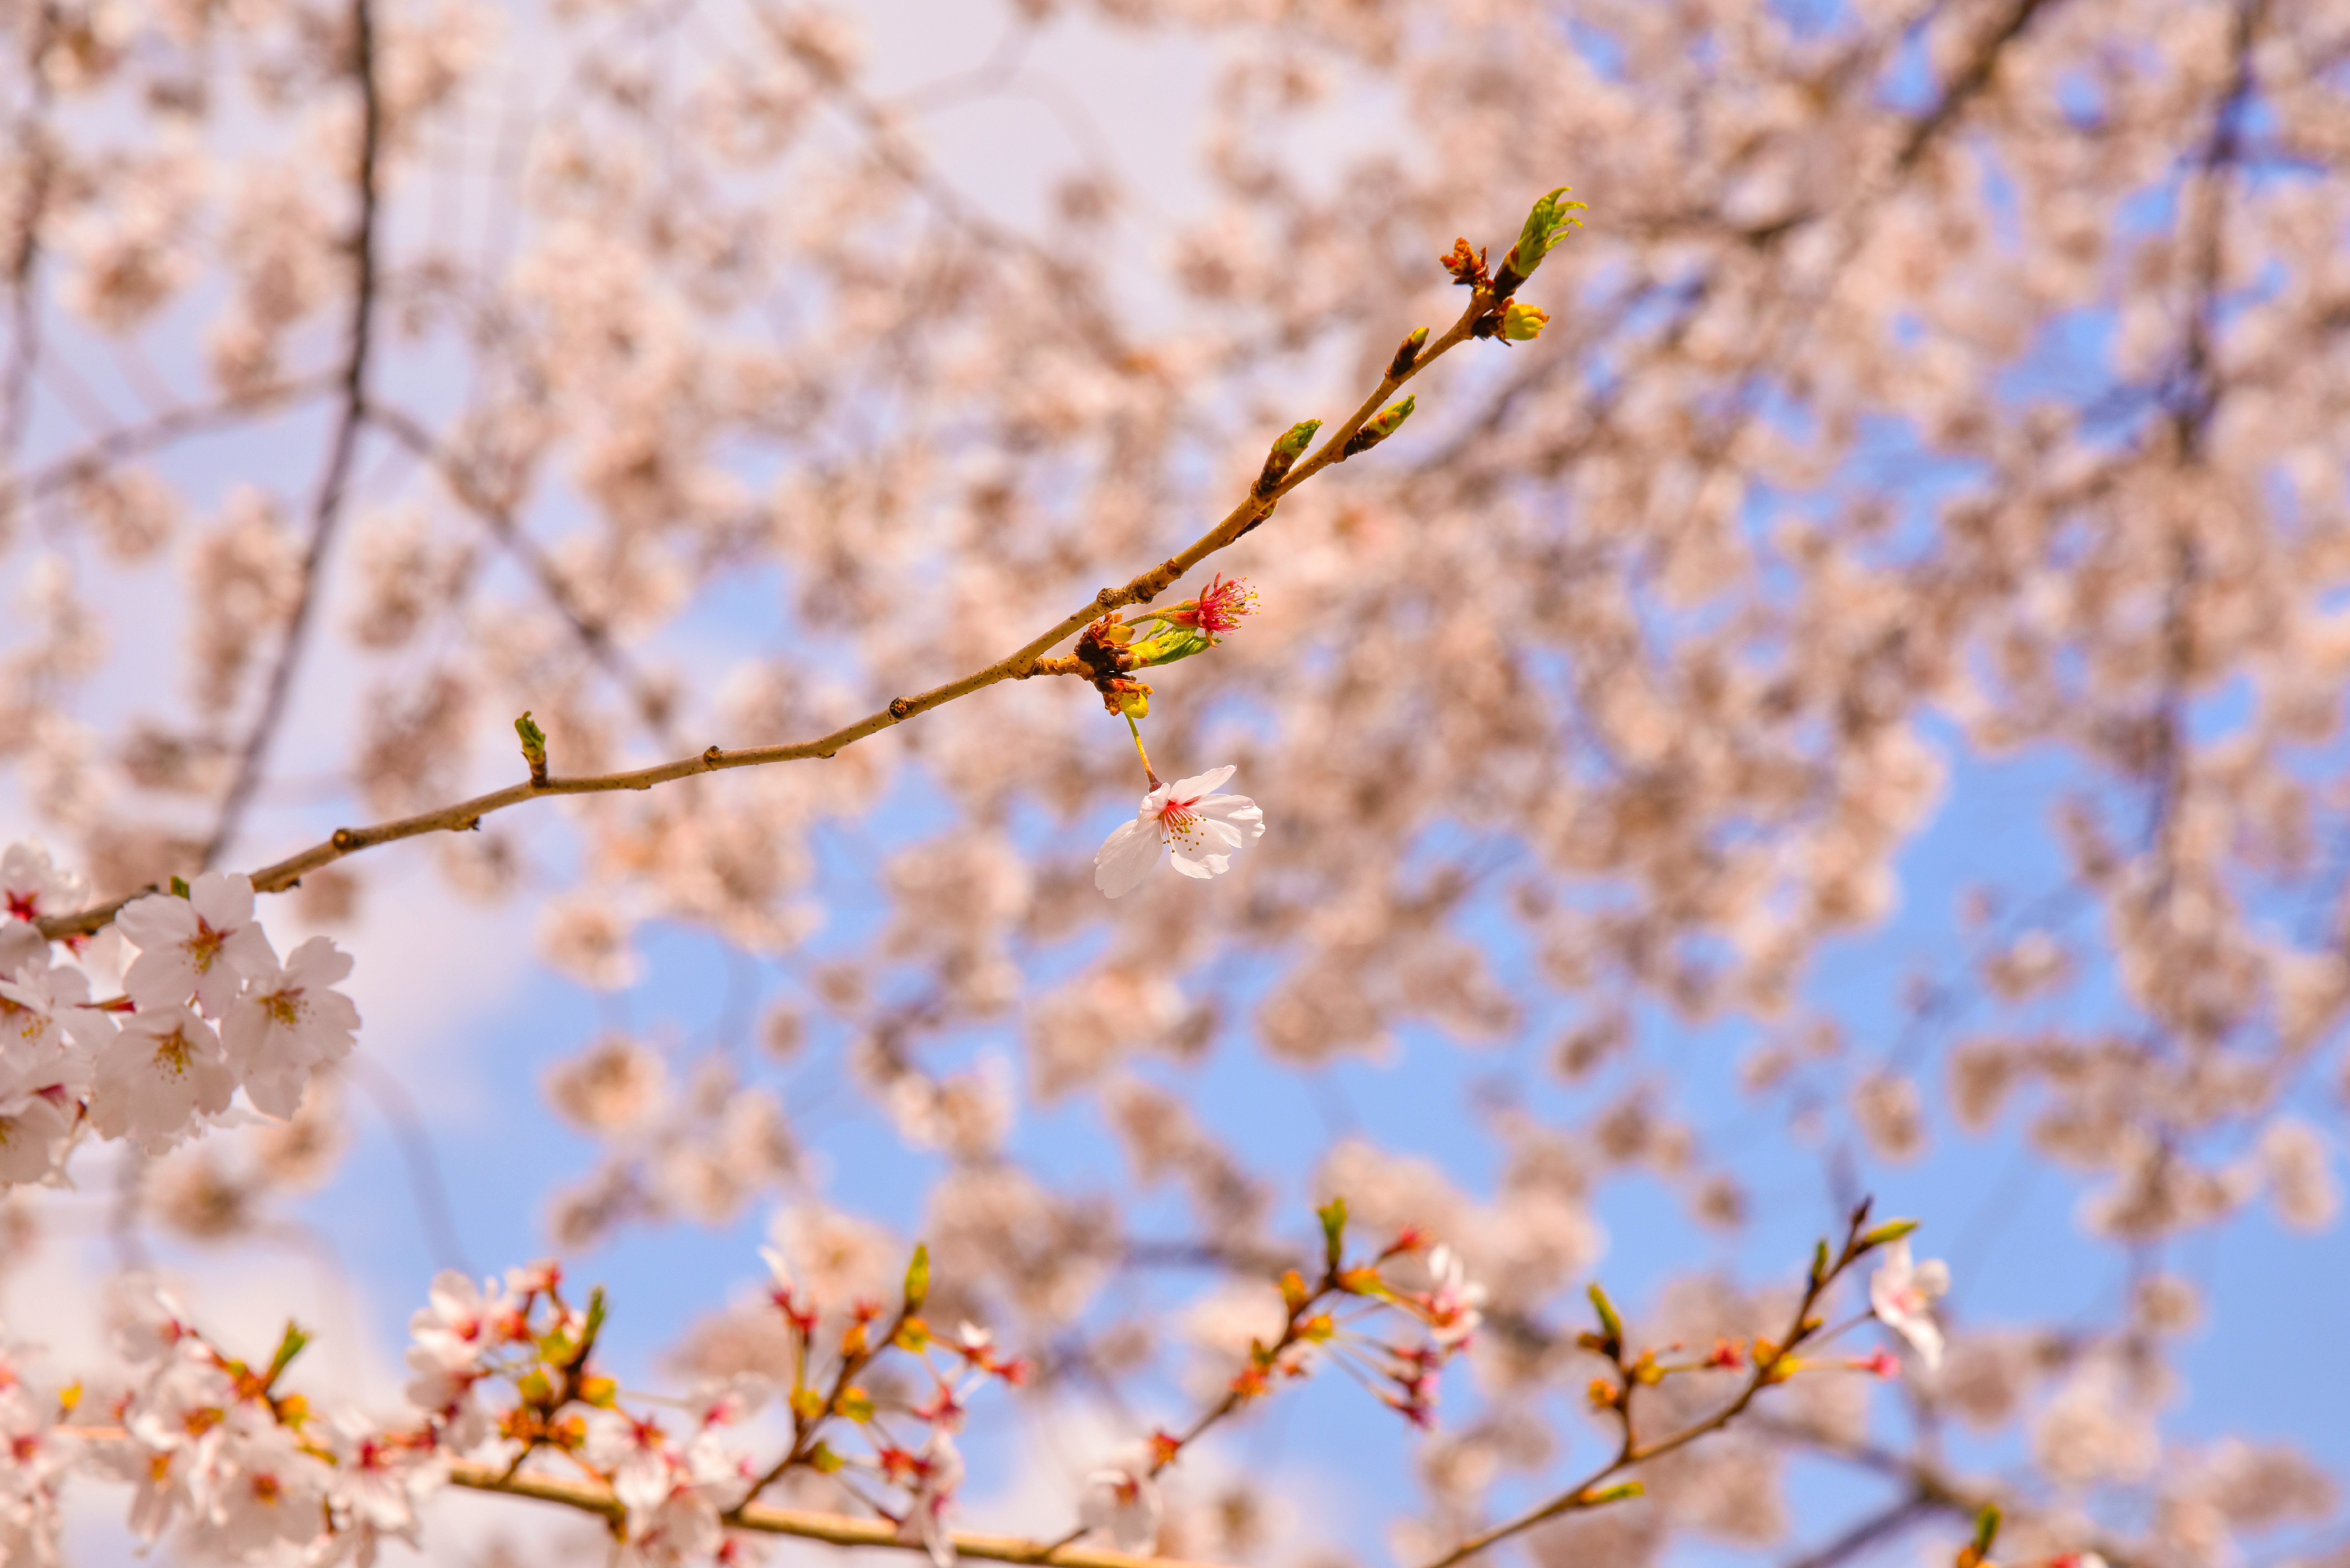 General 7360x4912 blossoms plants spring nature trees branch flowers cherry blossom